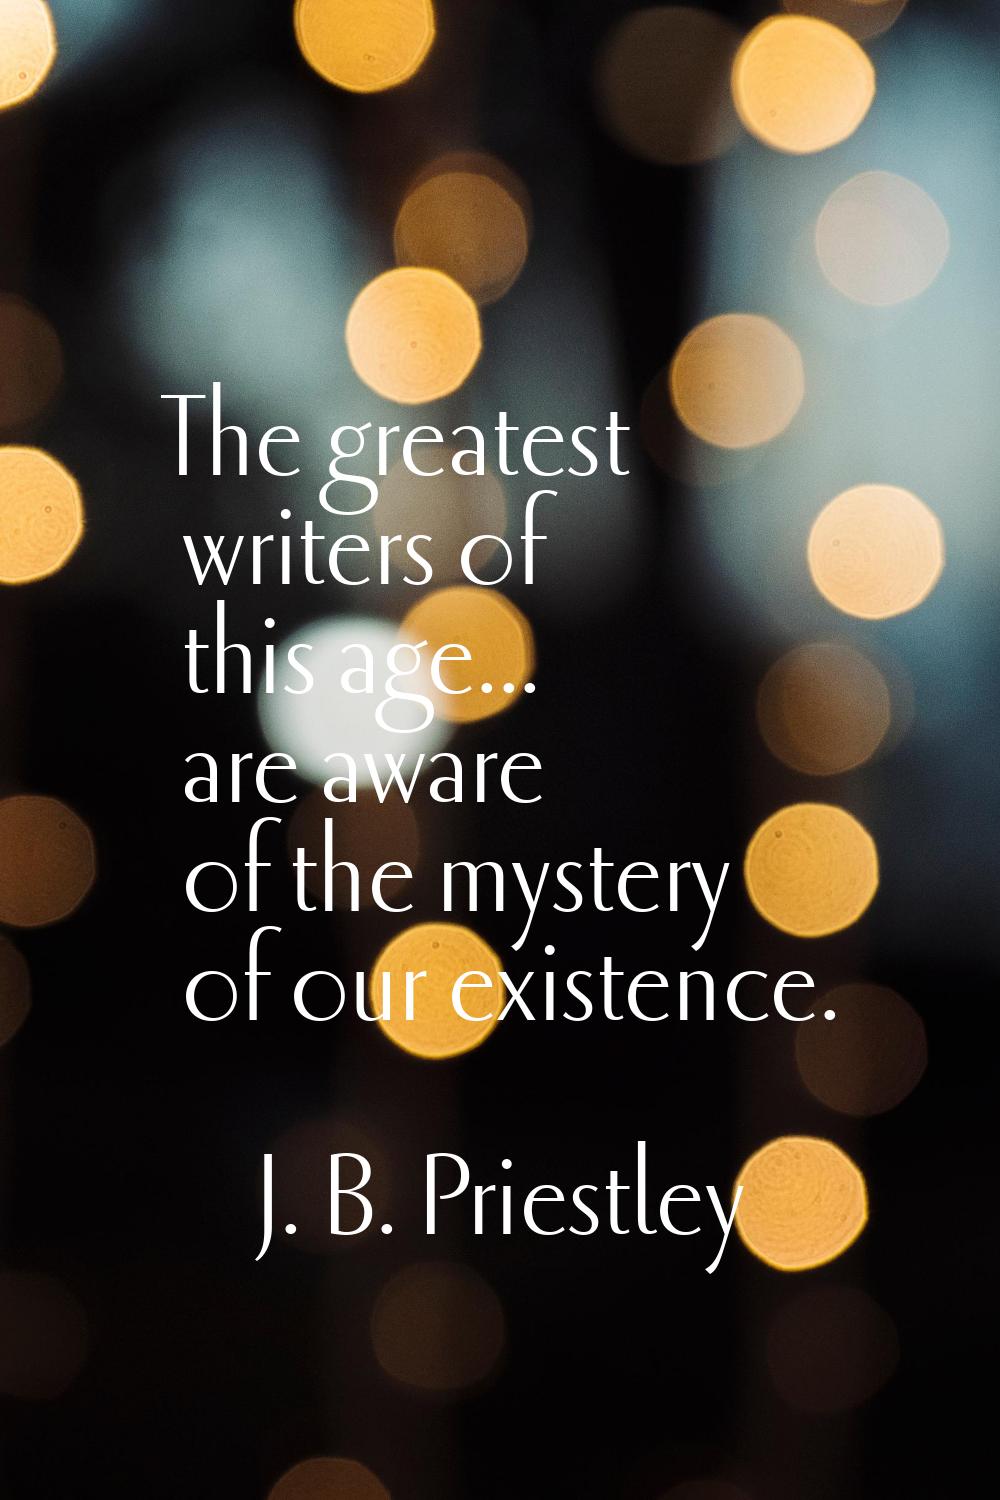 The greatest writers of this age... are aware of the mystery of our existence.